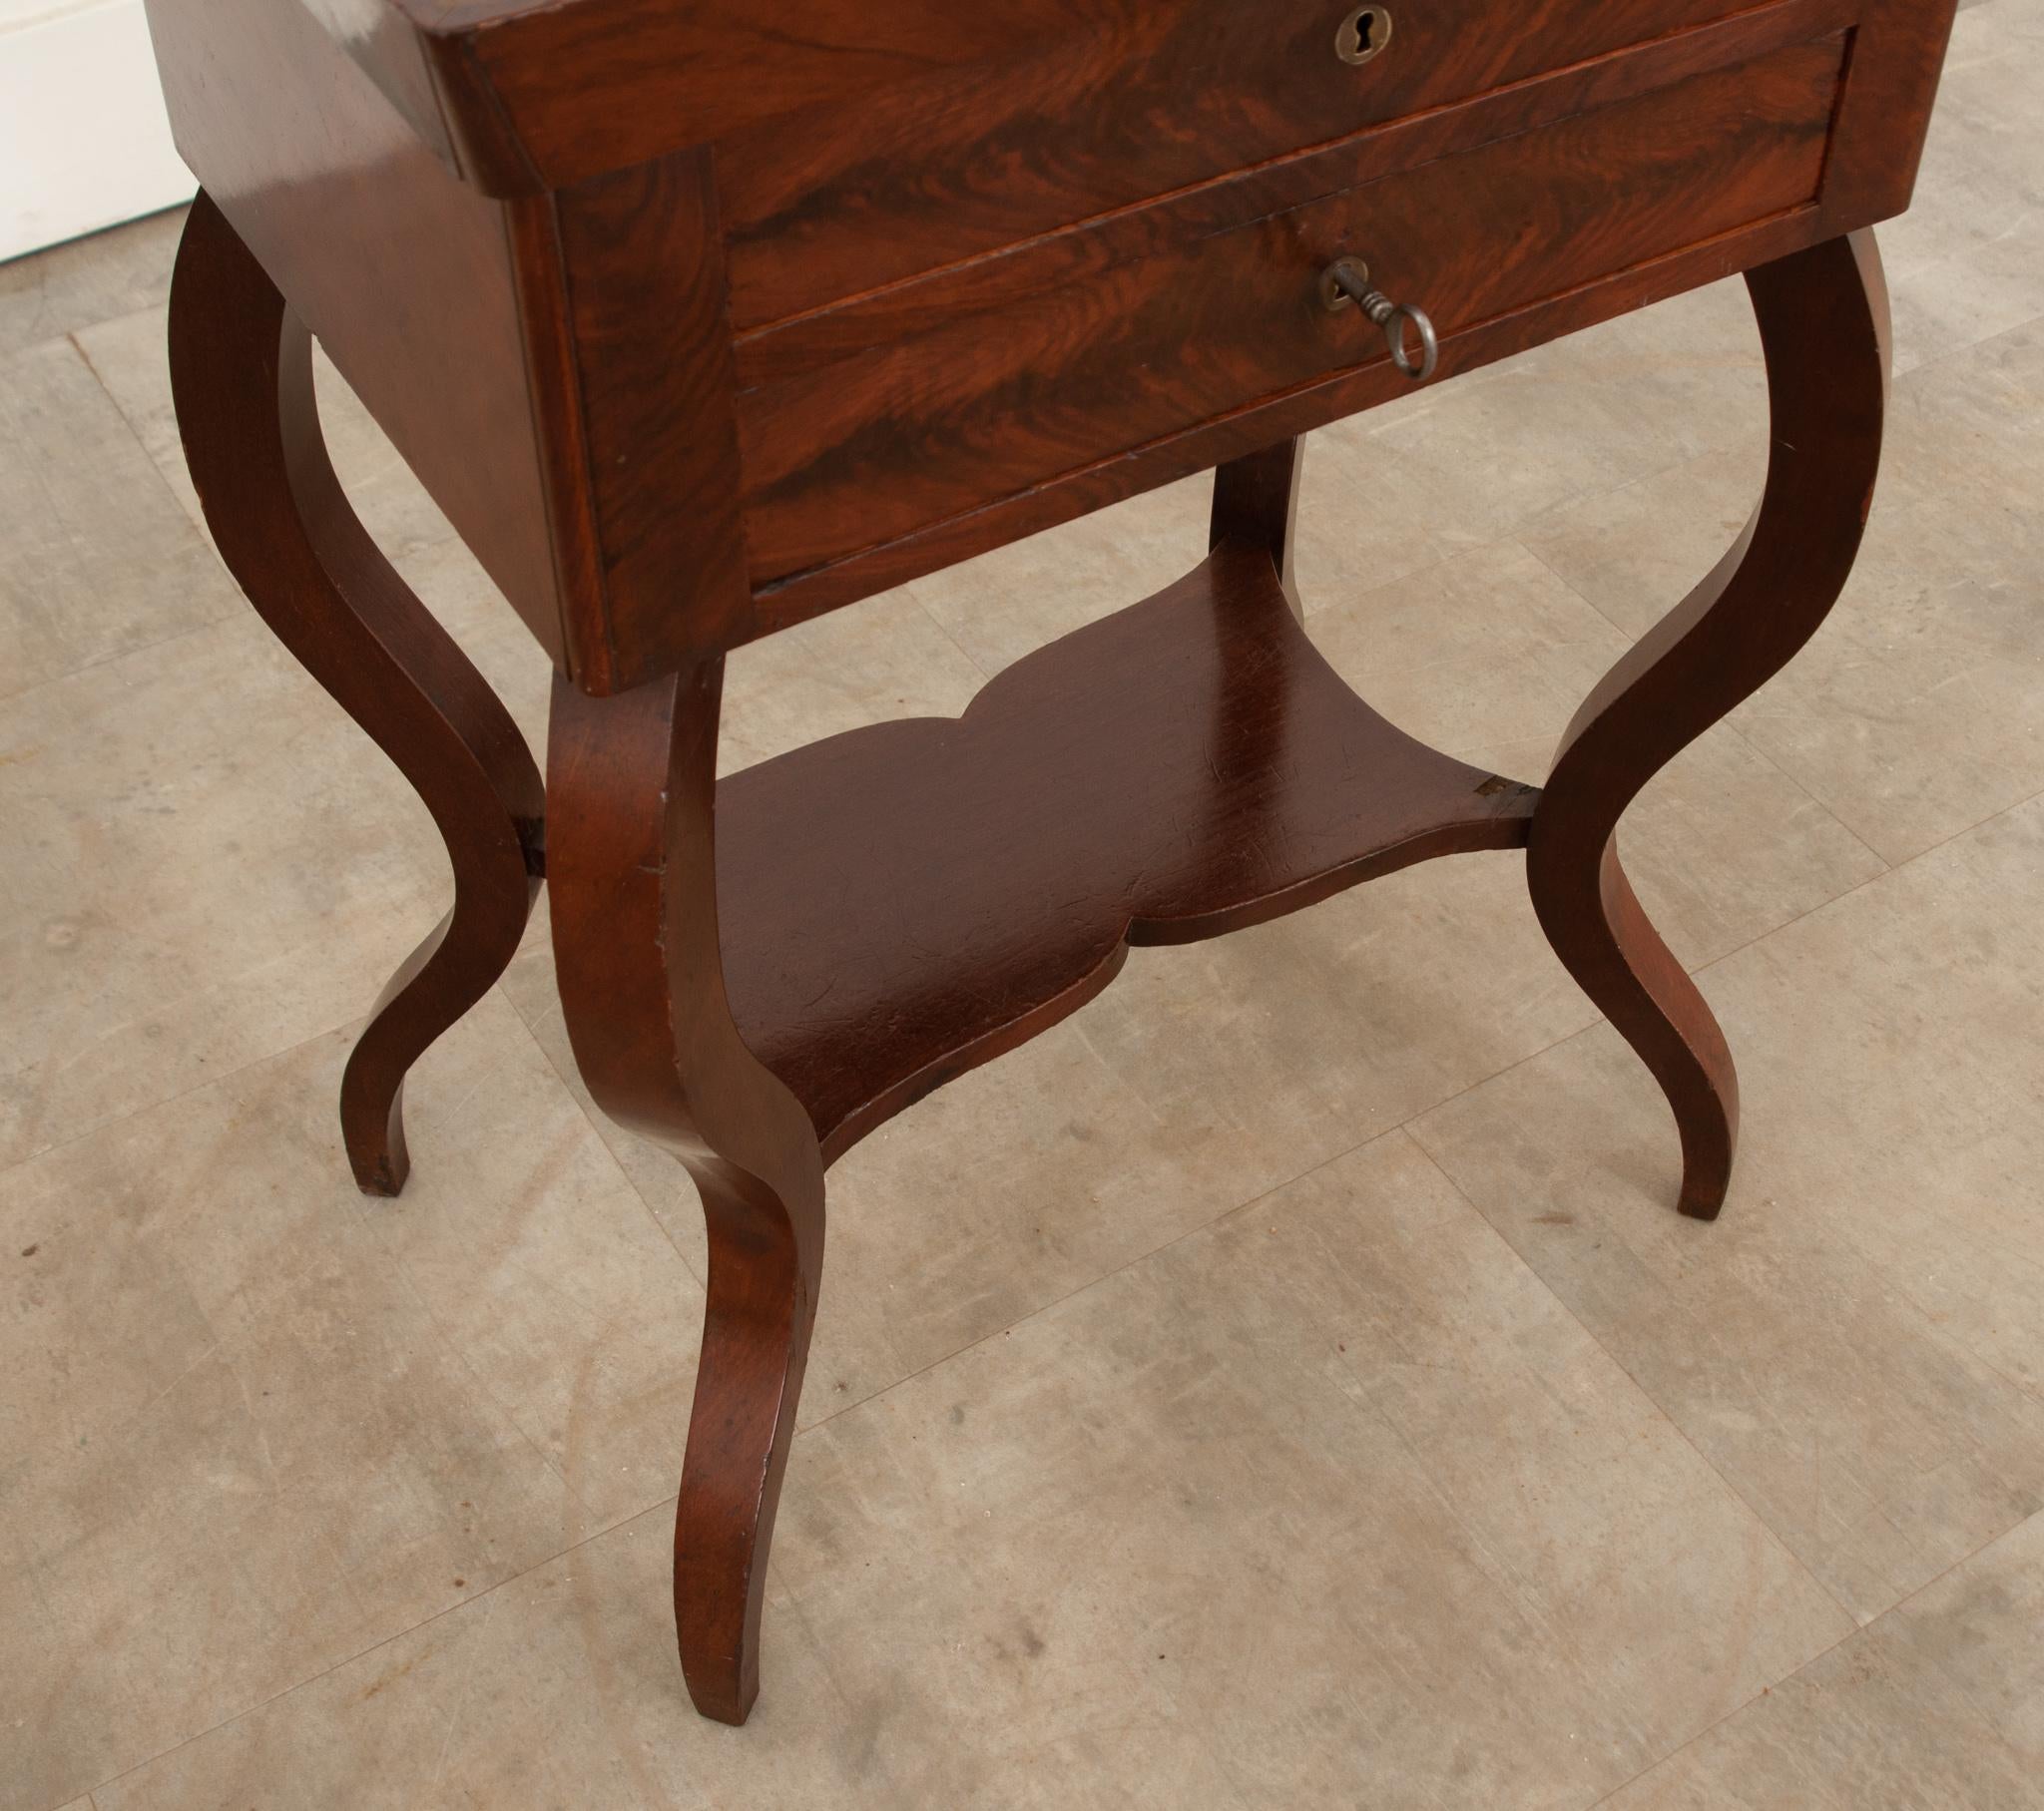 Hand-Crafted French 19th Century Mahogany Commode Table